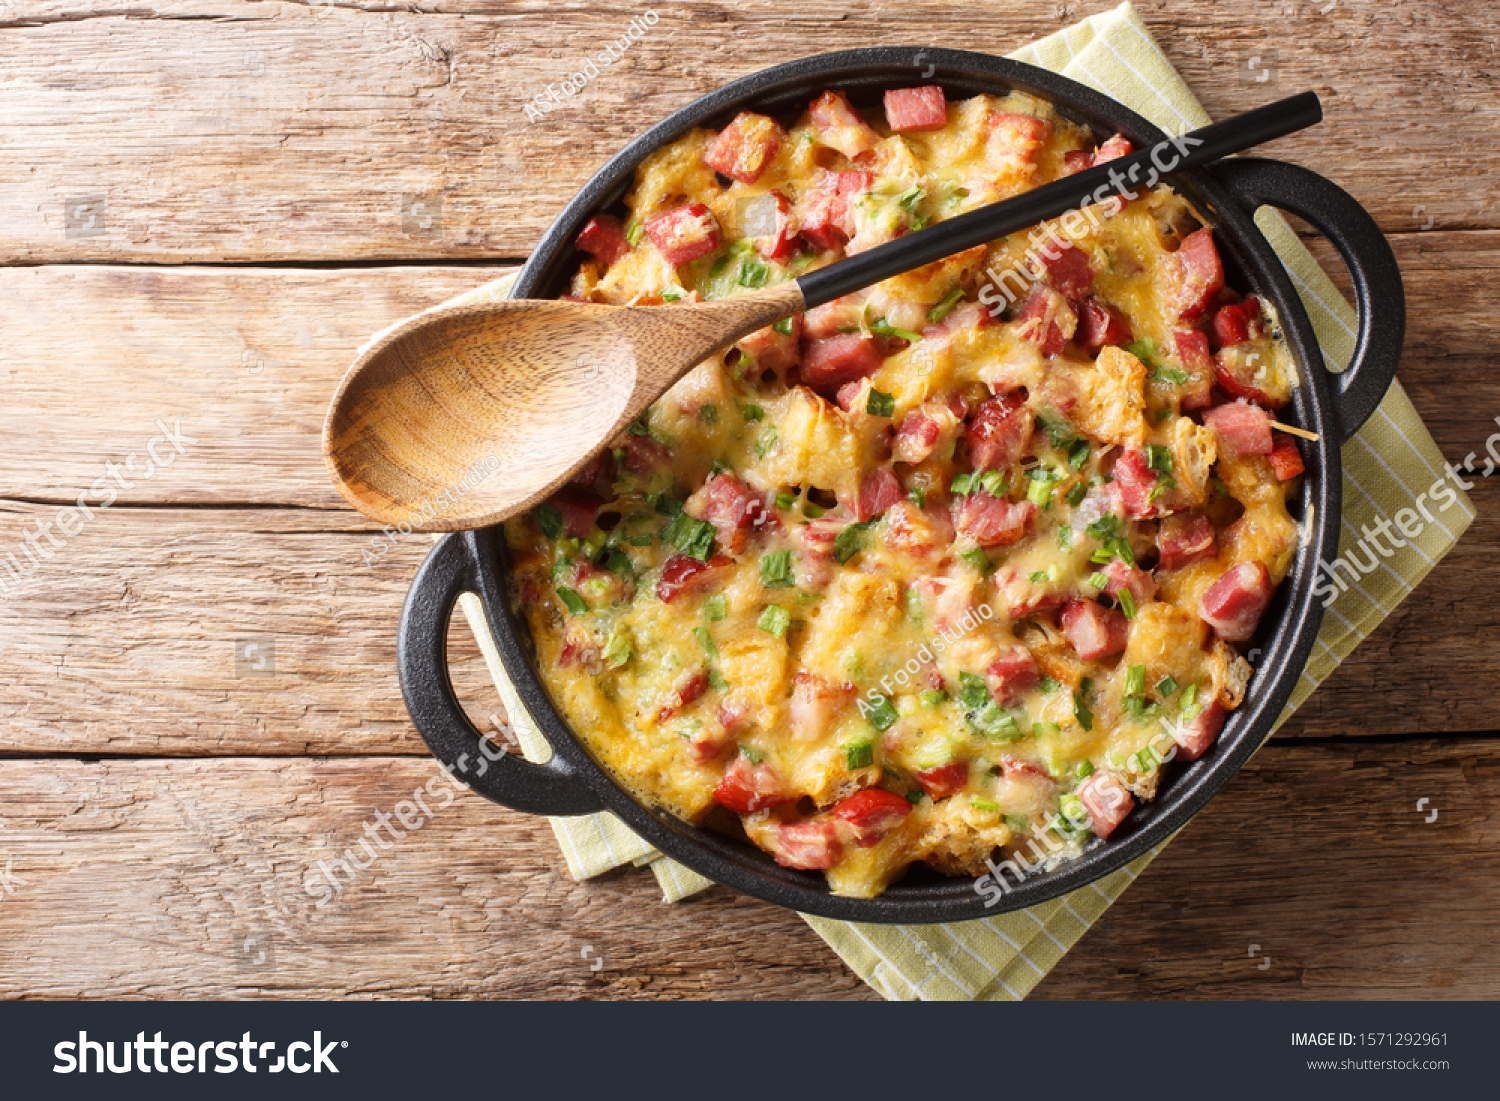 Tasty hot homemade strata with ham, onions, cheese and eggs close-up in a pan on the table. Horizontal top view from above
 #1571292961